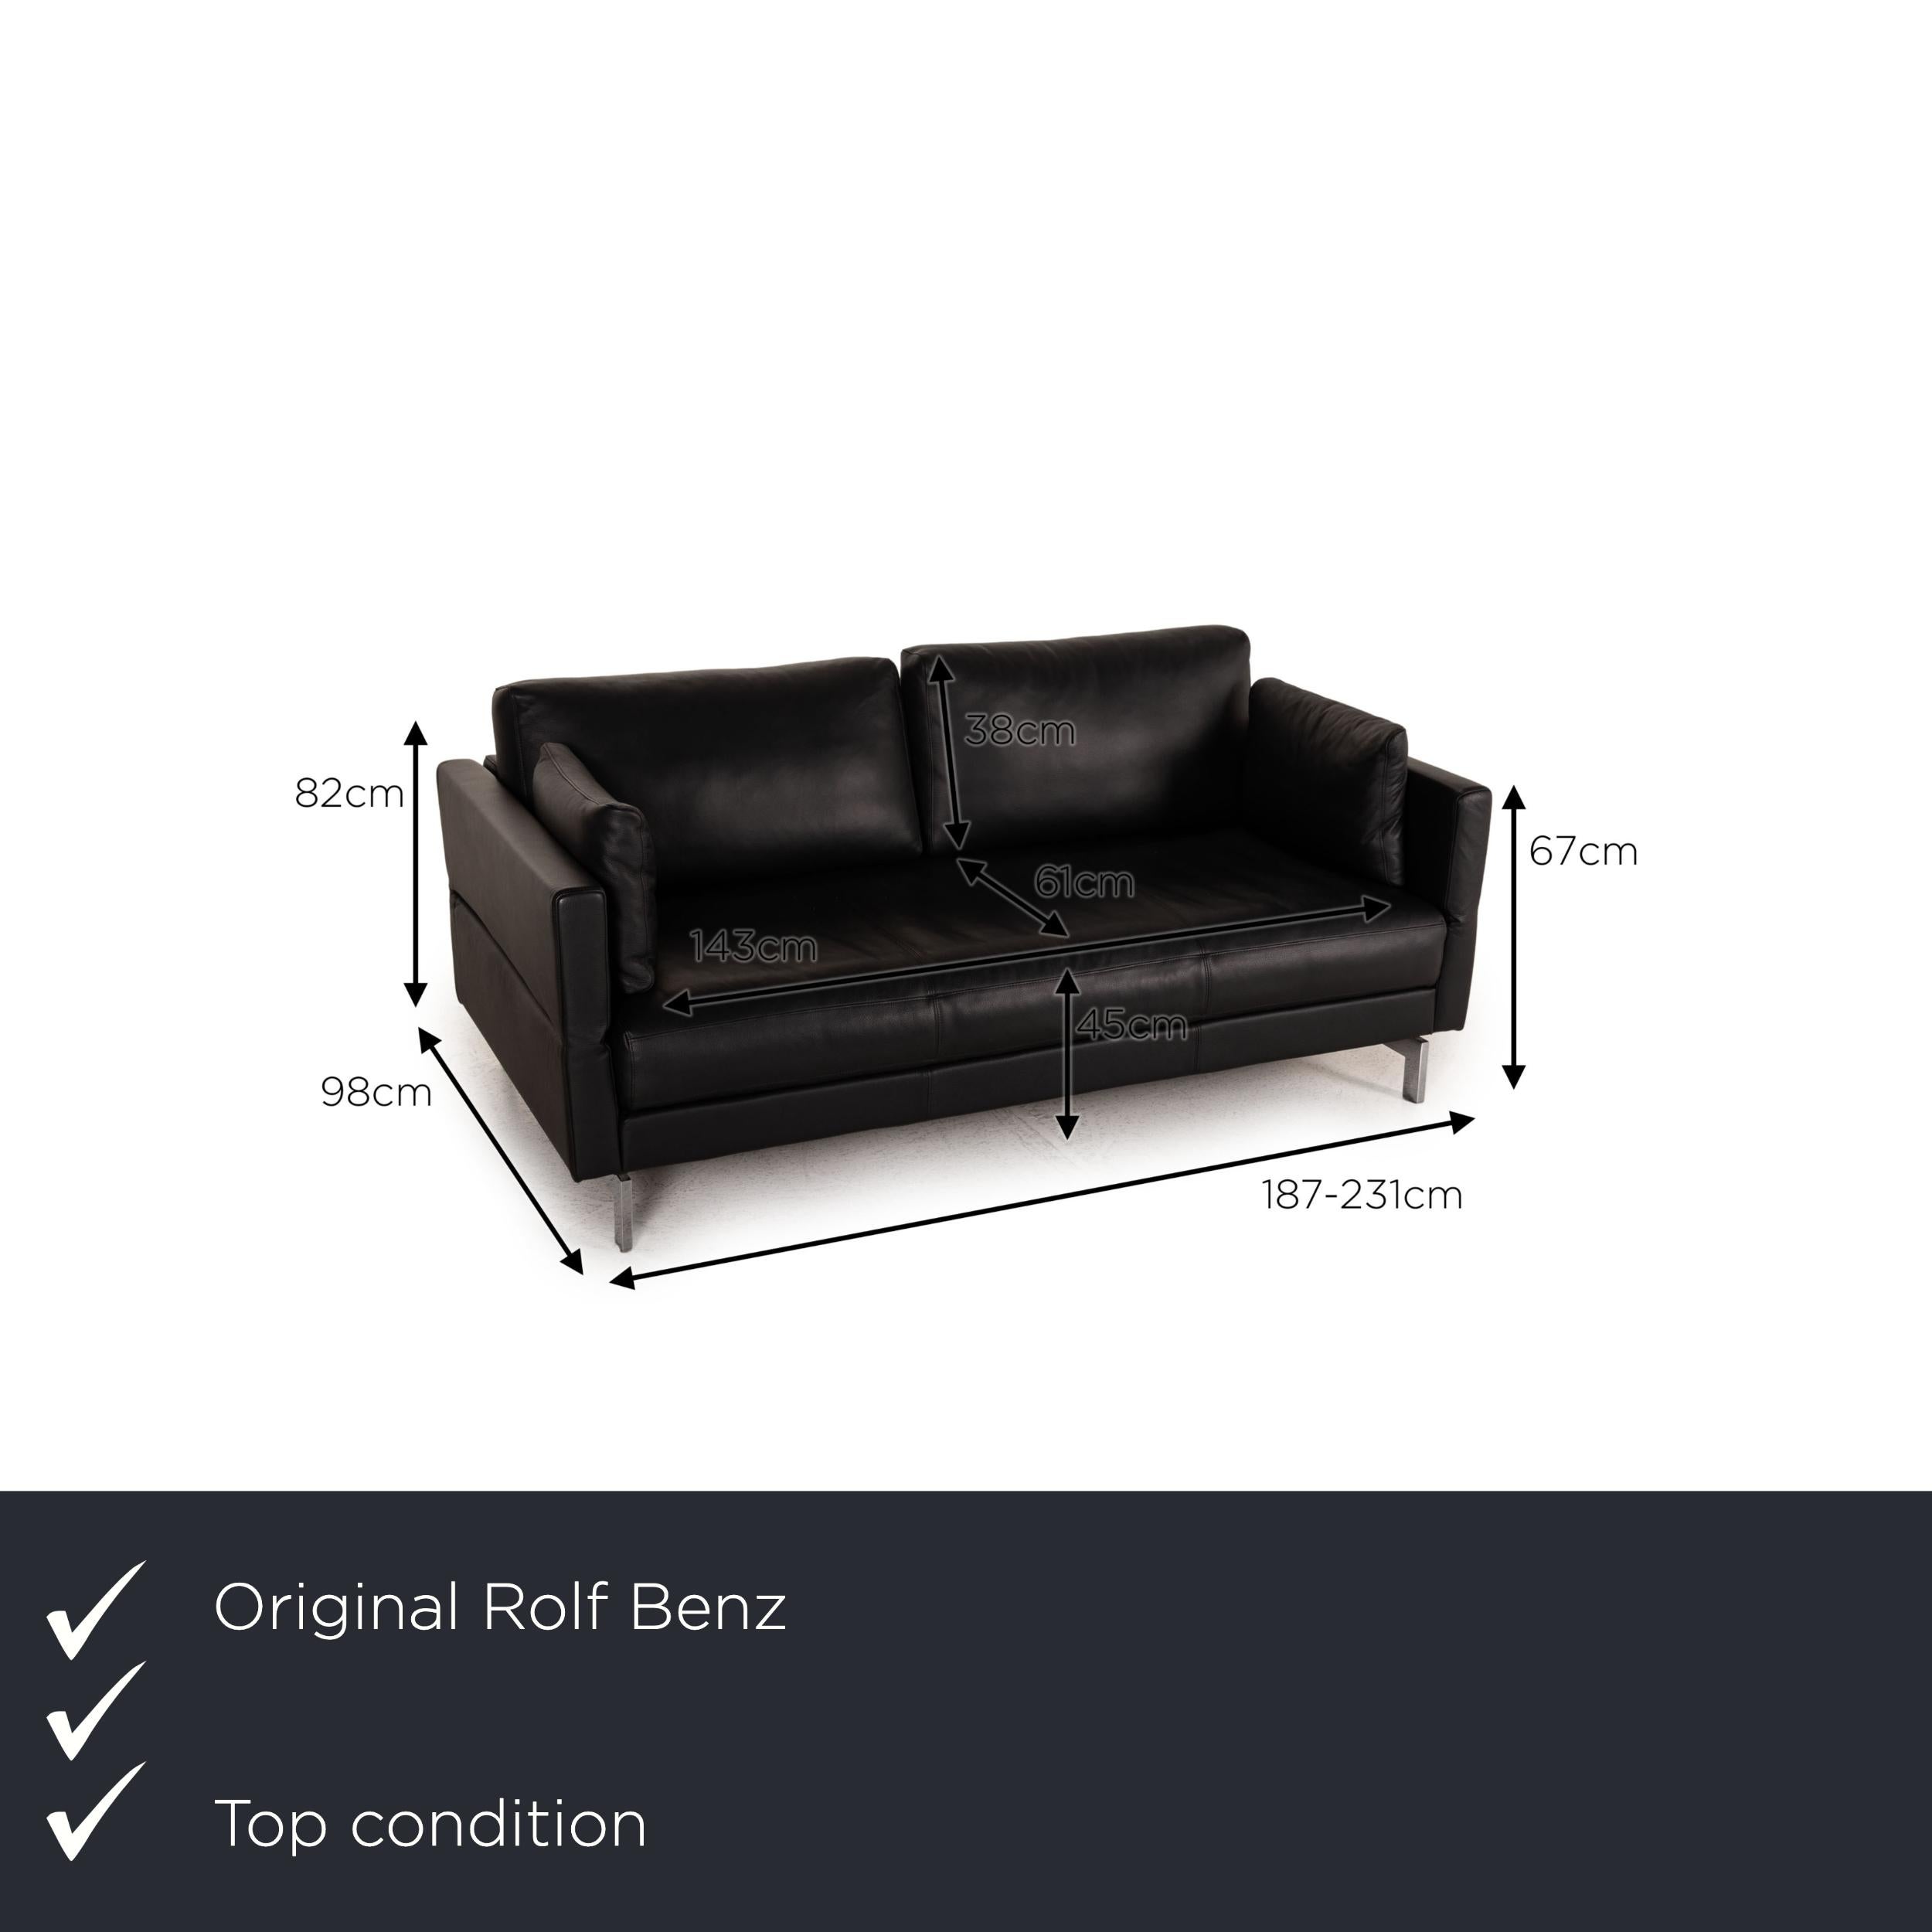 We present to you a Rolf Benz Vida leather sofa black three-seater couch function.

Product measurements in centimeters:

depth: 98
width: 187
height: 82
seat height: 45
rest height: 67
seat depth: 61
seat width: 143
back height: